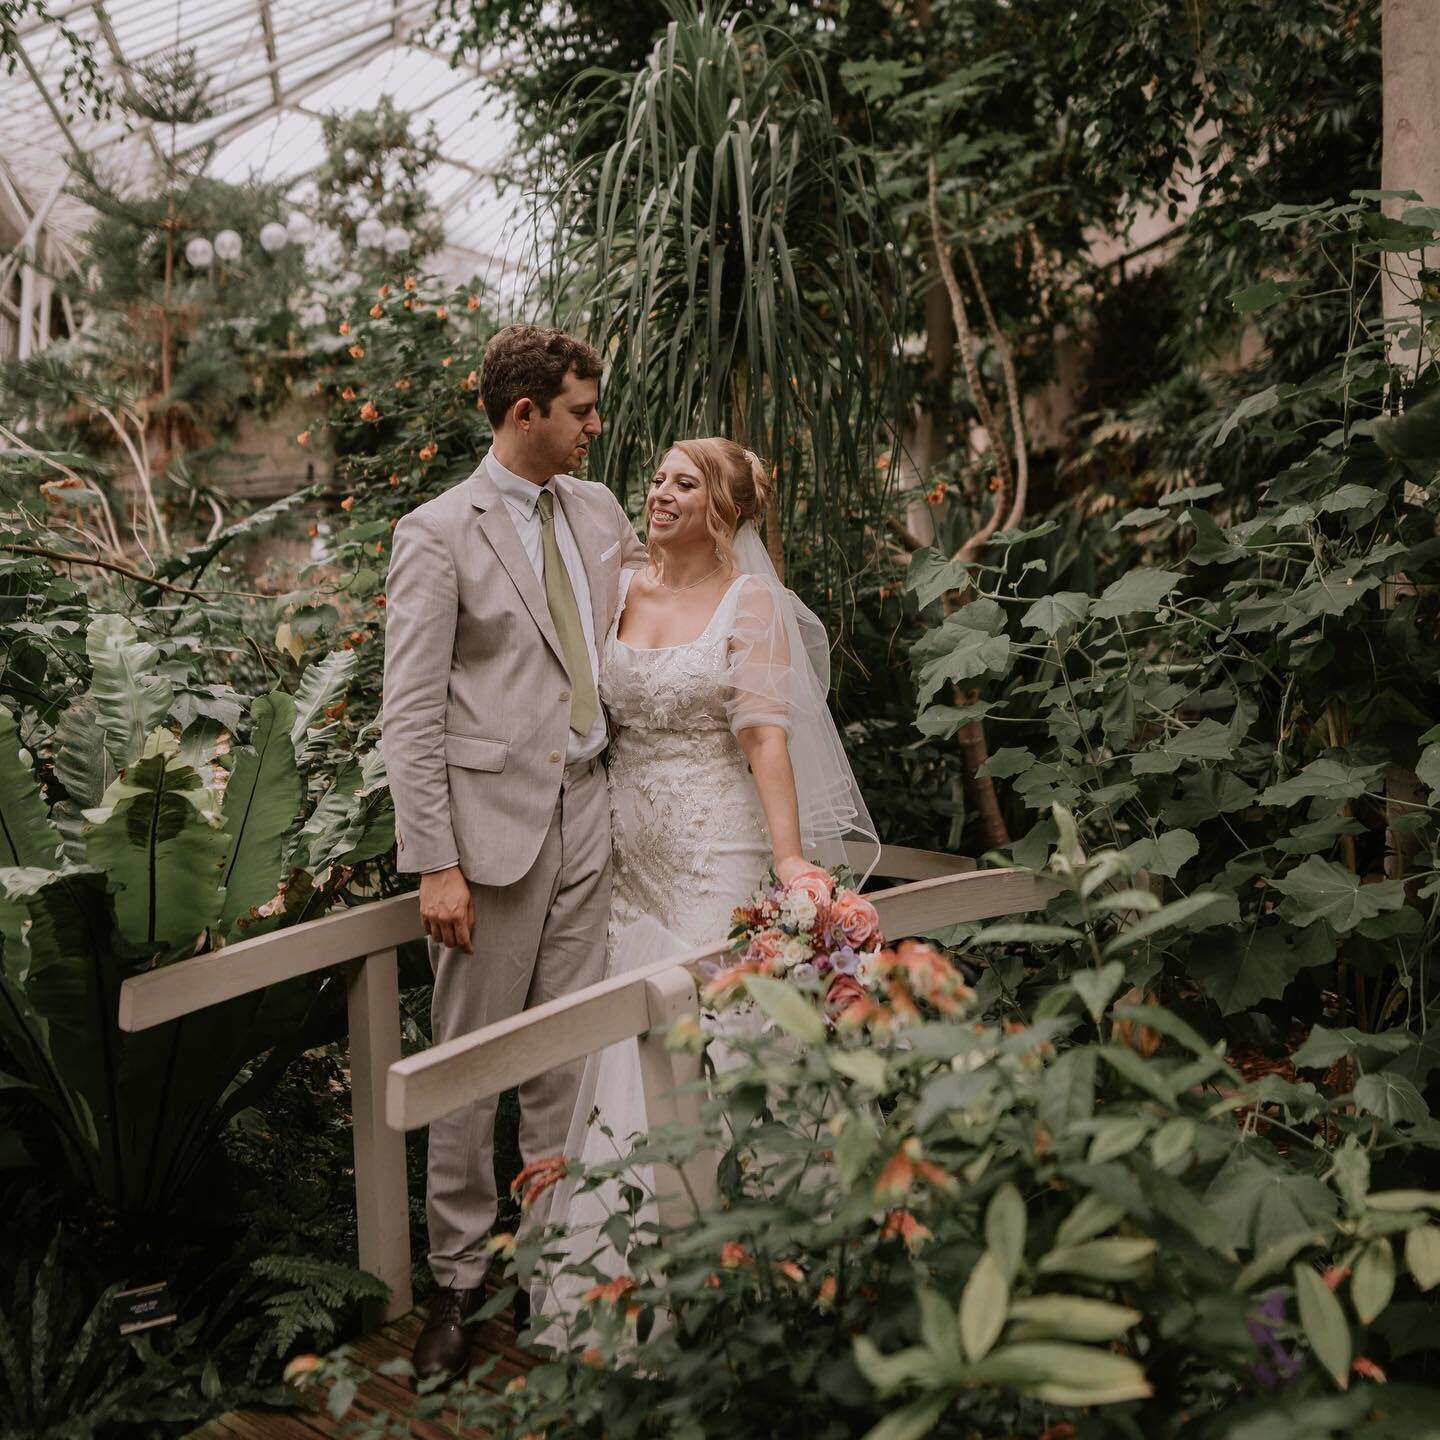 A big congratulations to our fabulous Lucy &amp; Josh #justmarried 🤍

Lucy &amp; Josh got married at the beautiful Barbican Conservatory. After 3 lessons with Emma, they wowed their guests with a wonderful First Dance to &ldquo;You Make My Dreams (C